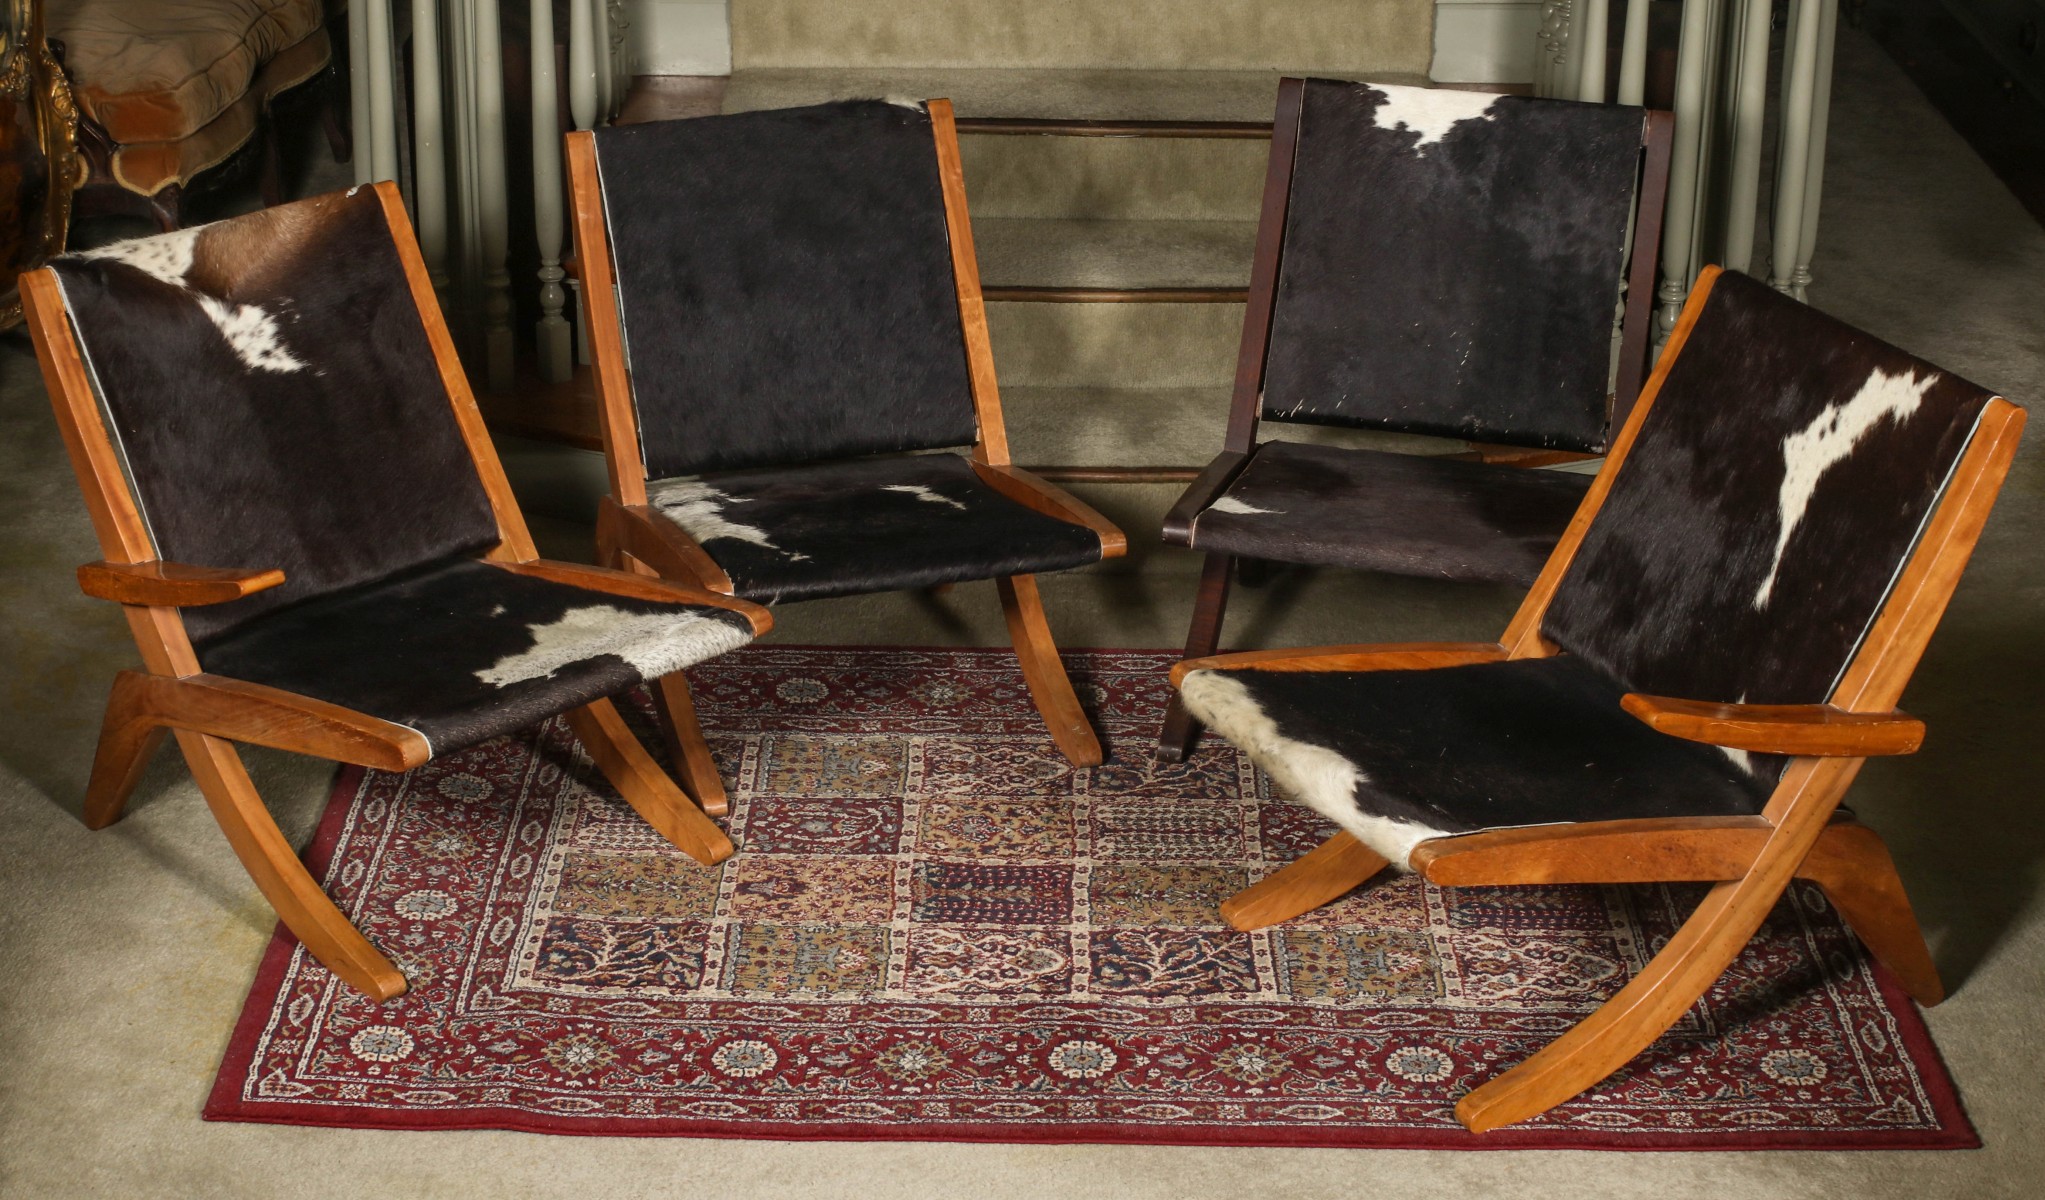 MID 20TH CENTURY SCANDINAVIAN SEATING WITH COW HIDE